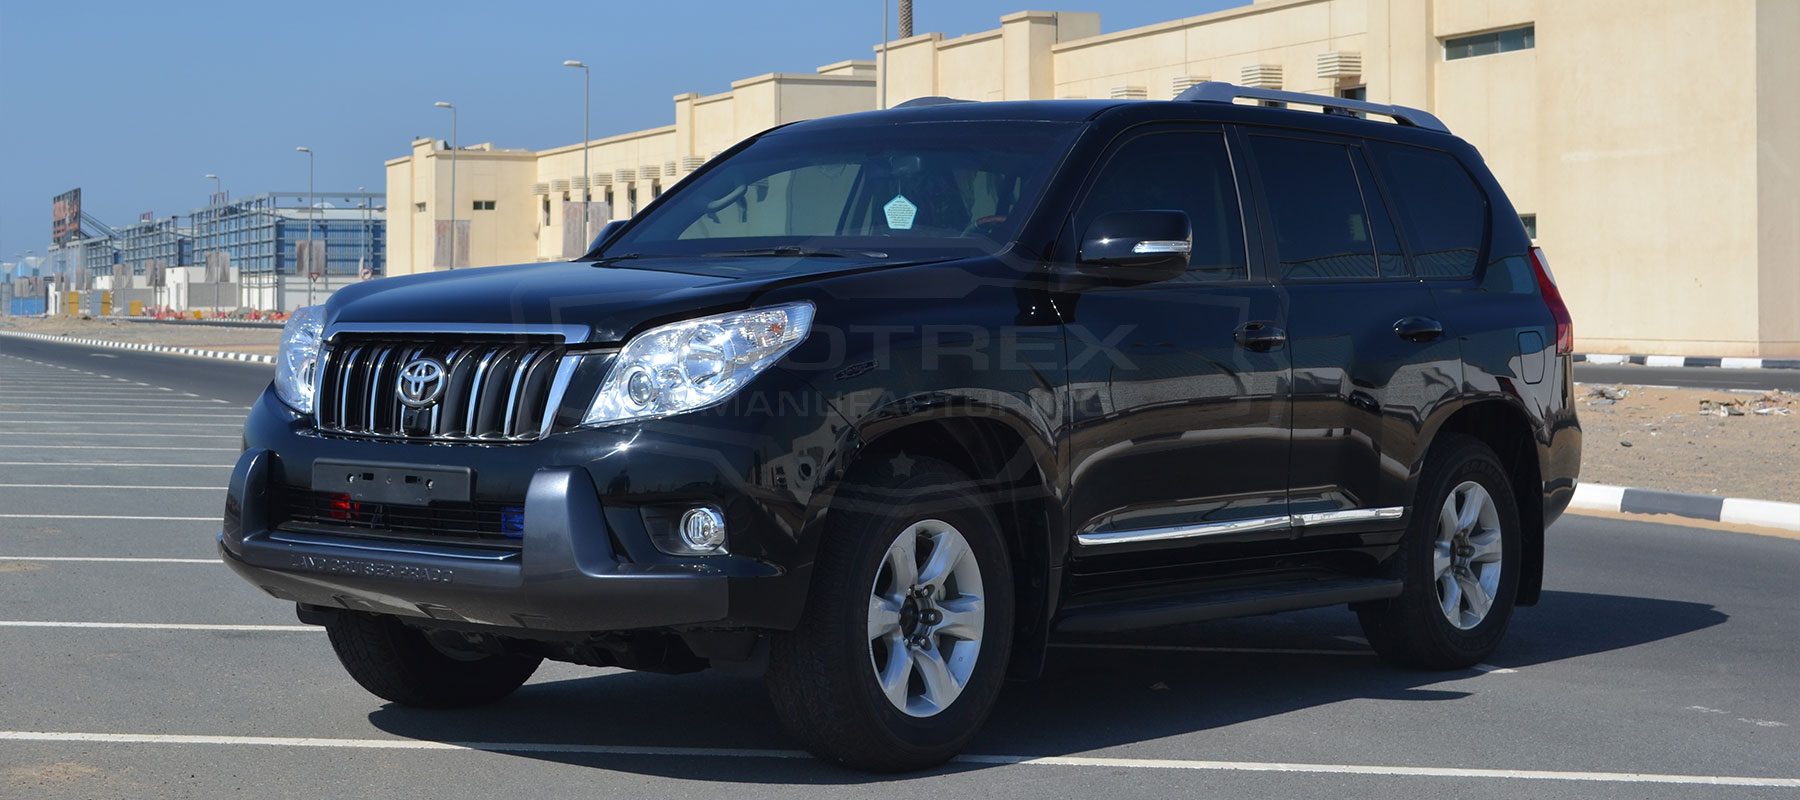 Armored Toyota Prado by Isotrex Manufacturing